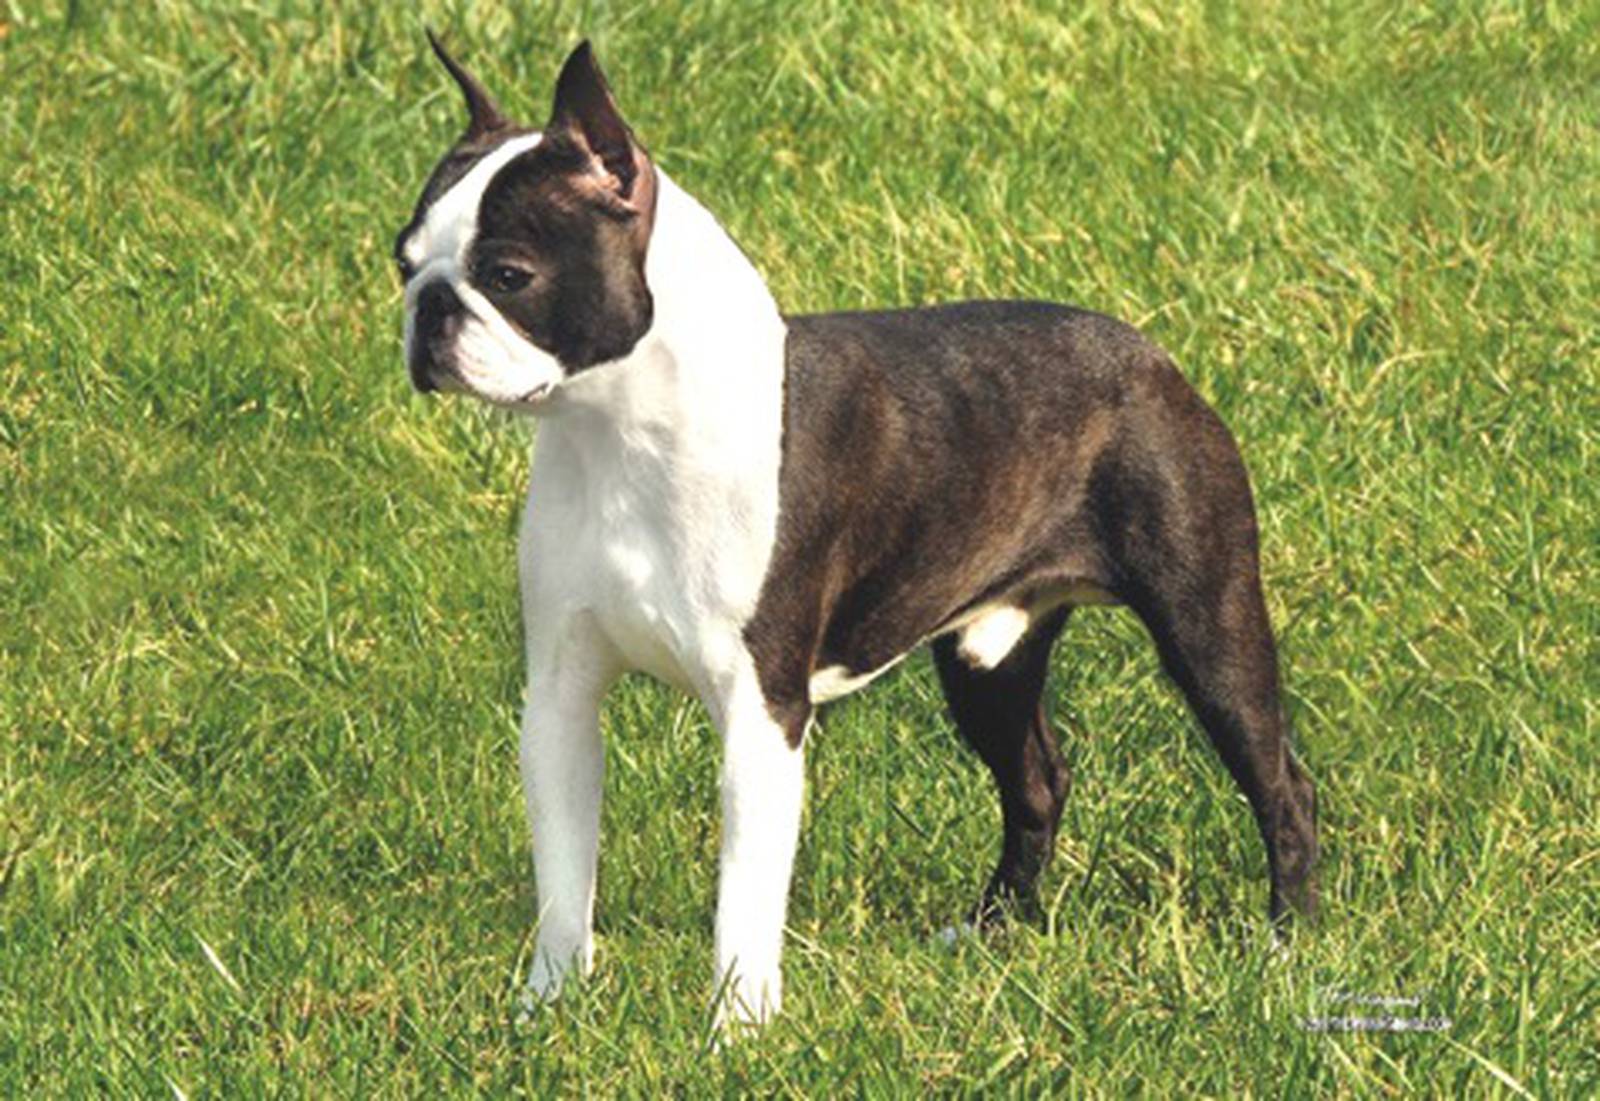 Dixon dog makes it to Westminster Boston terrier Hoss a serious